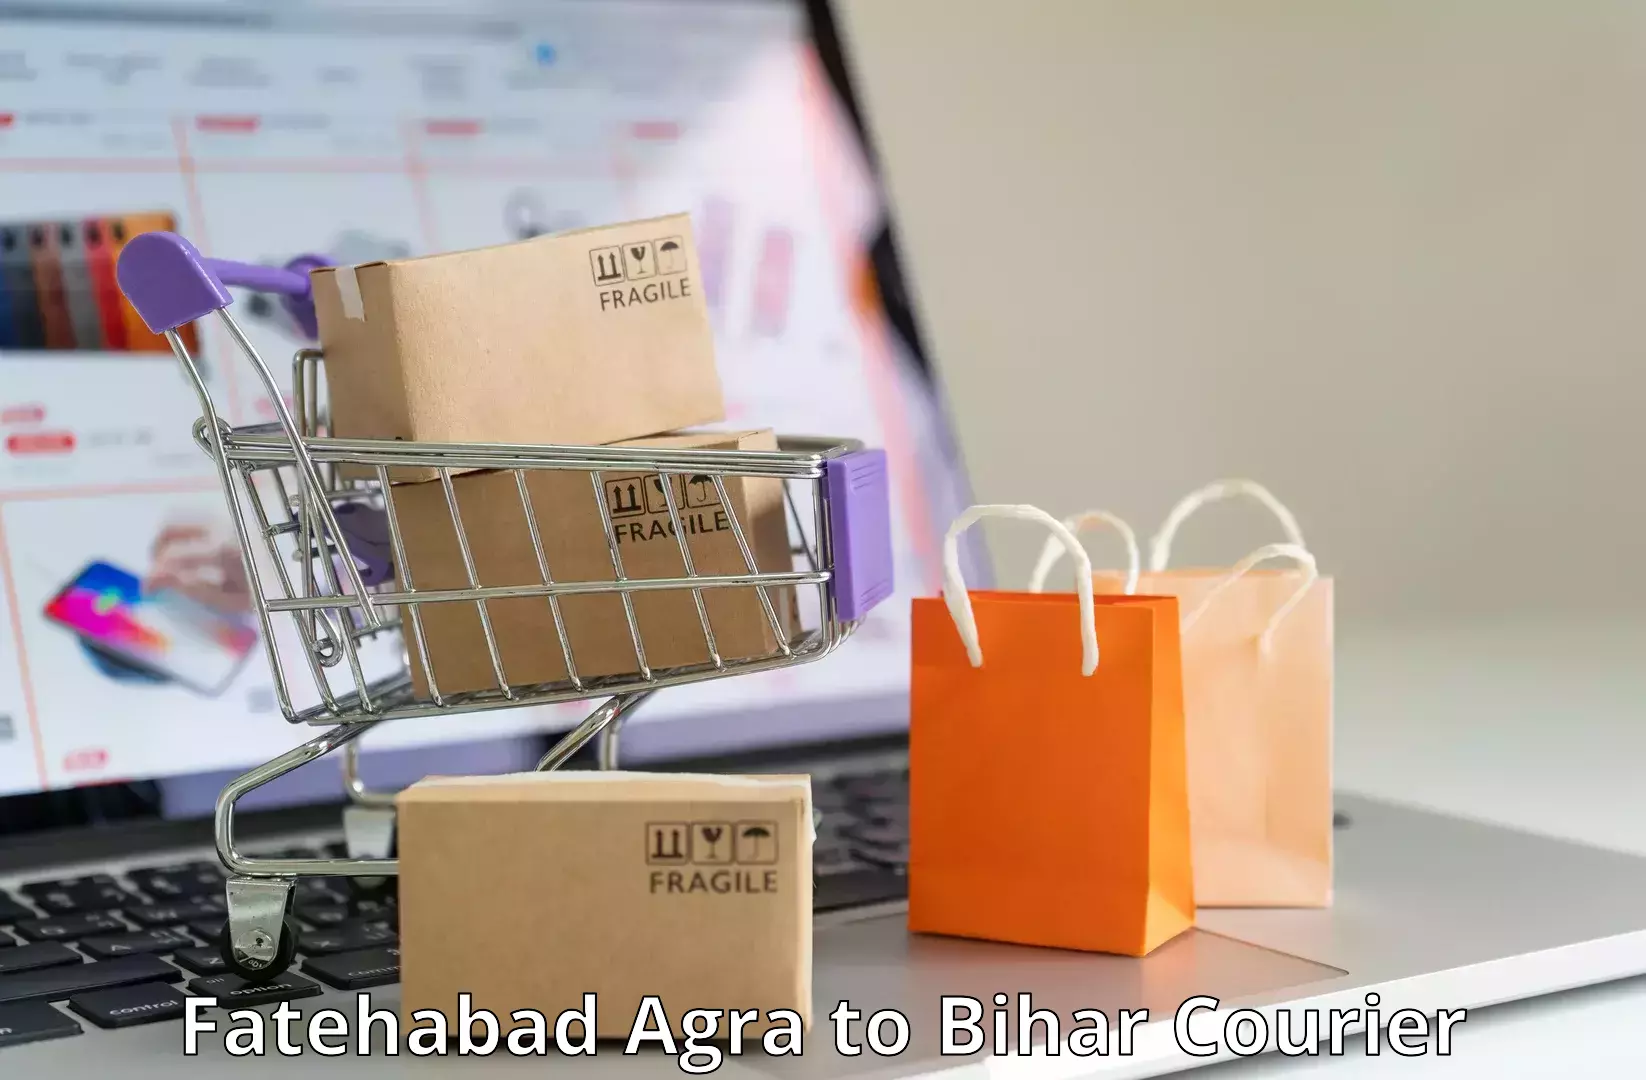 Modern courier technology Fatehabad Agra to Mohammadpur